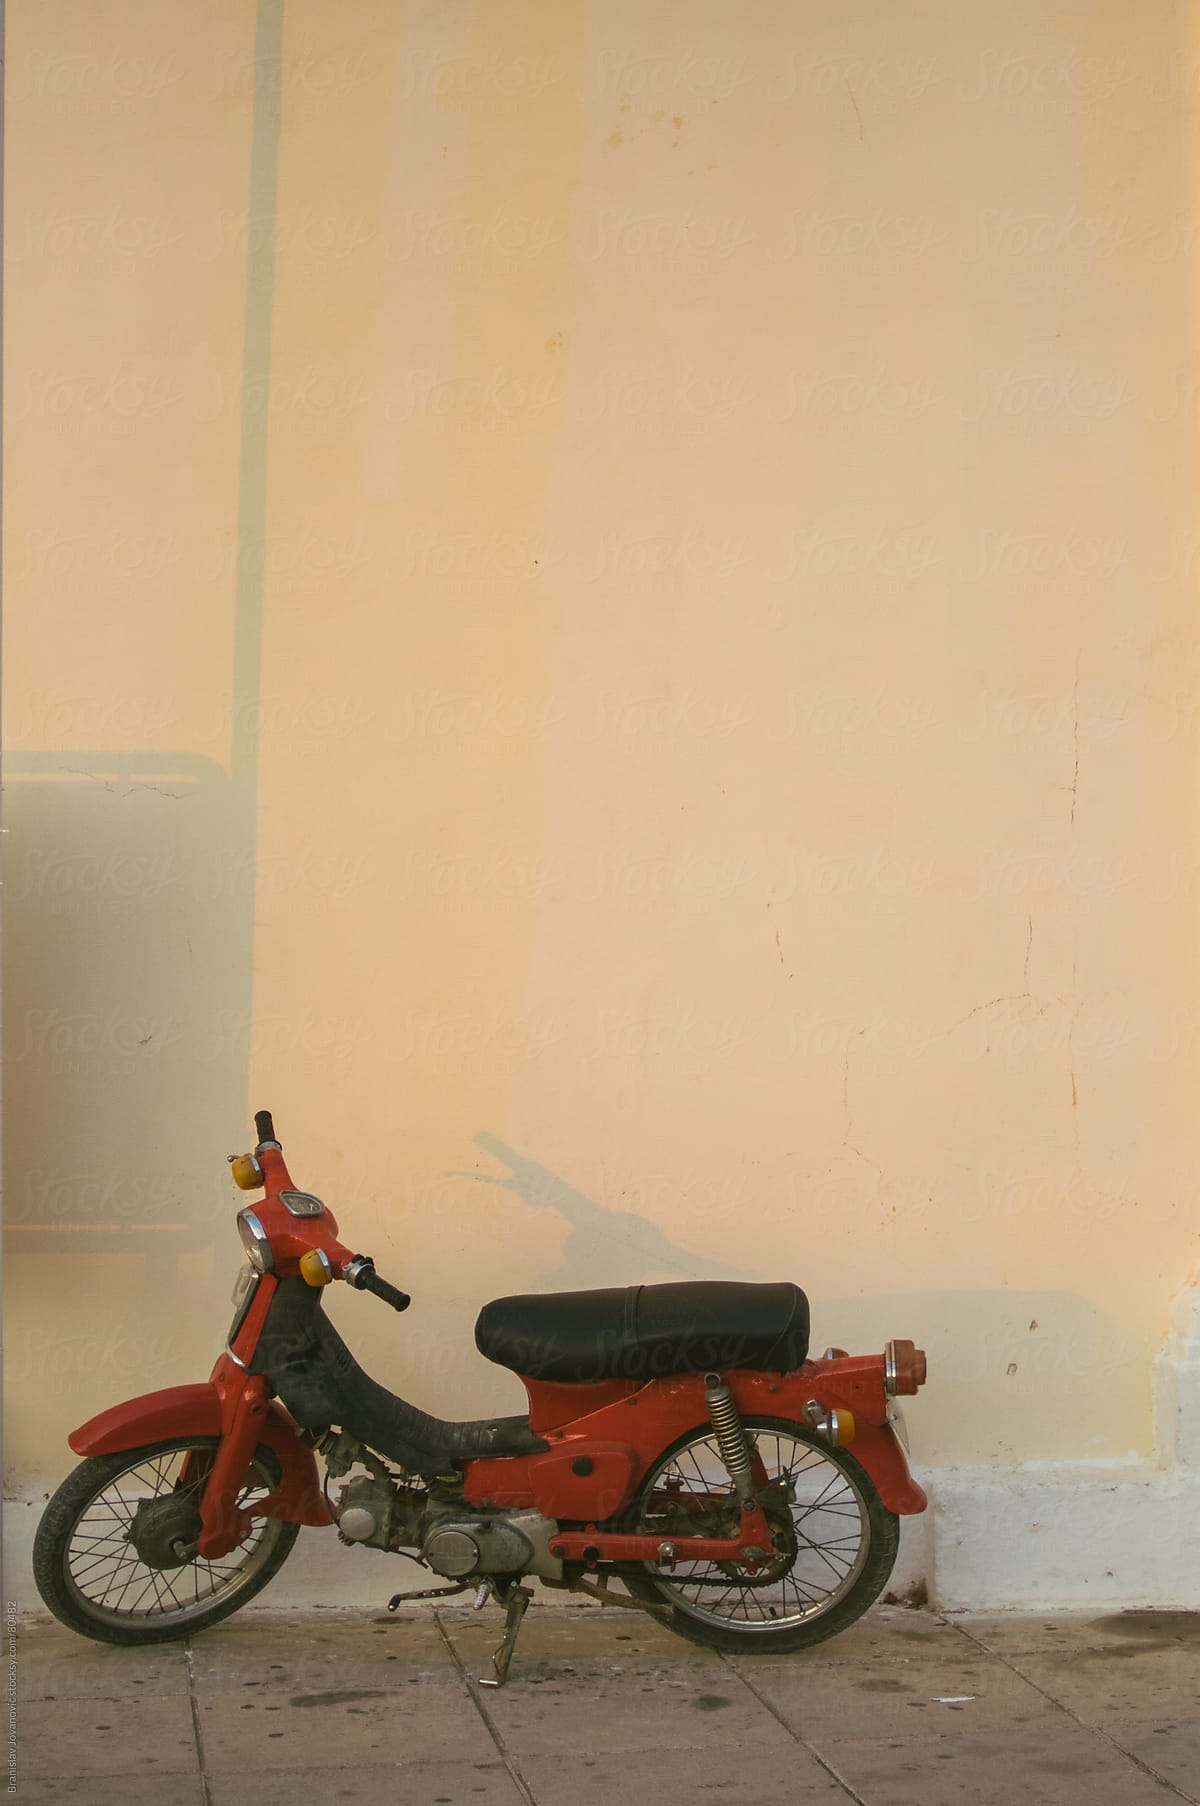 Old Red Motorcycle On the Street